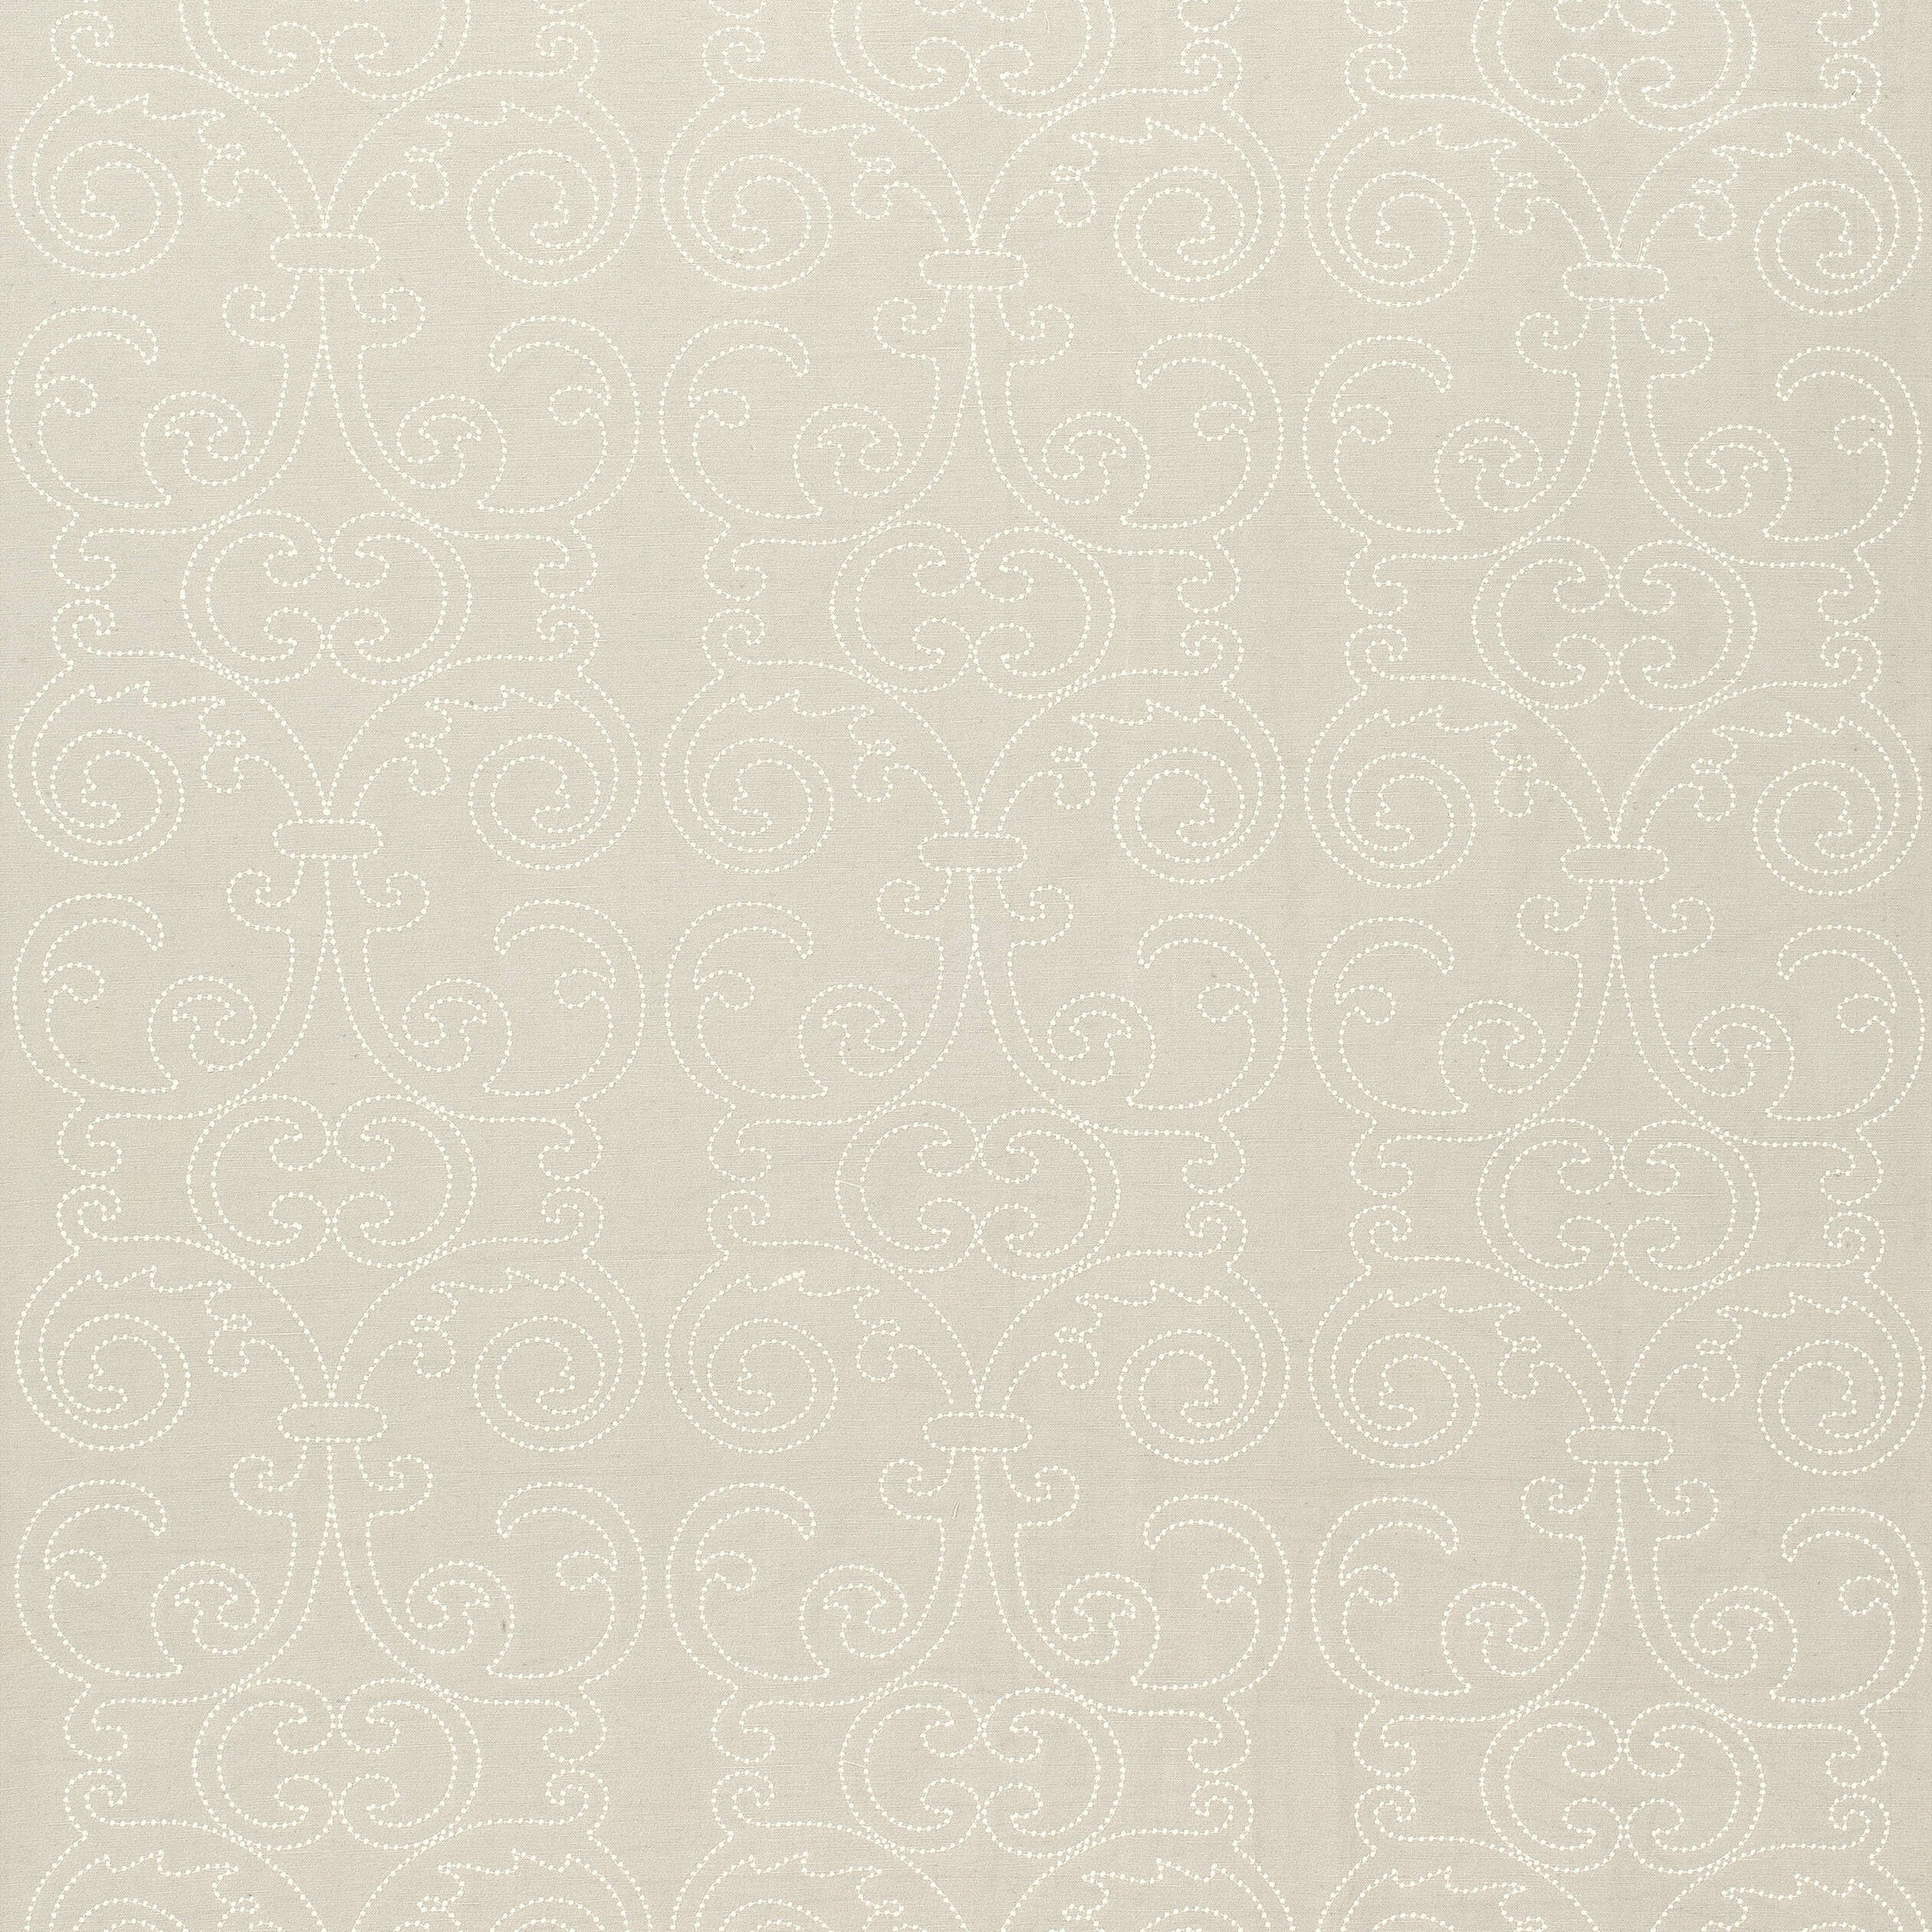 Barcelona Embroidery fabric in natural color - pattern number AW9123 - by Anna French in the Natural Glimmer collection